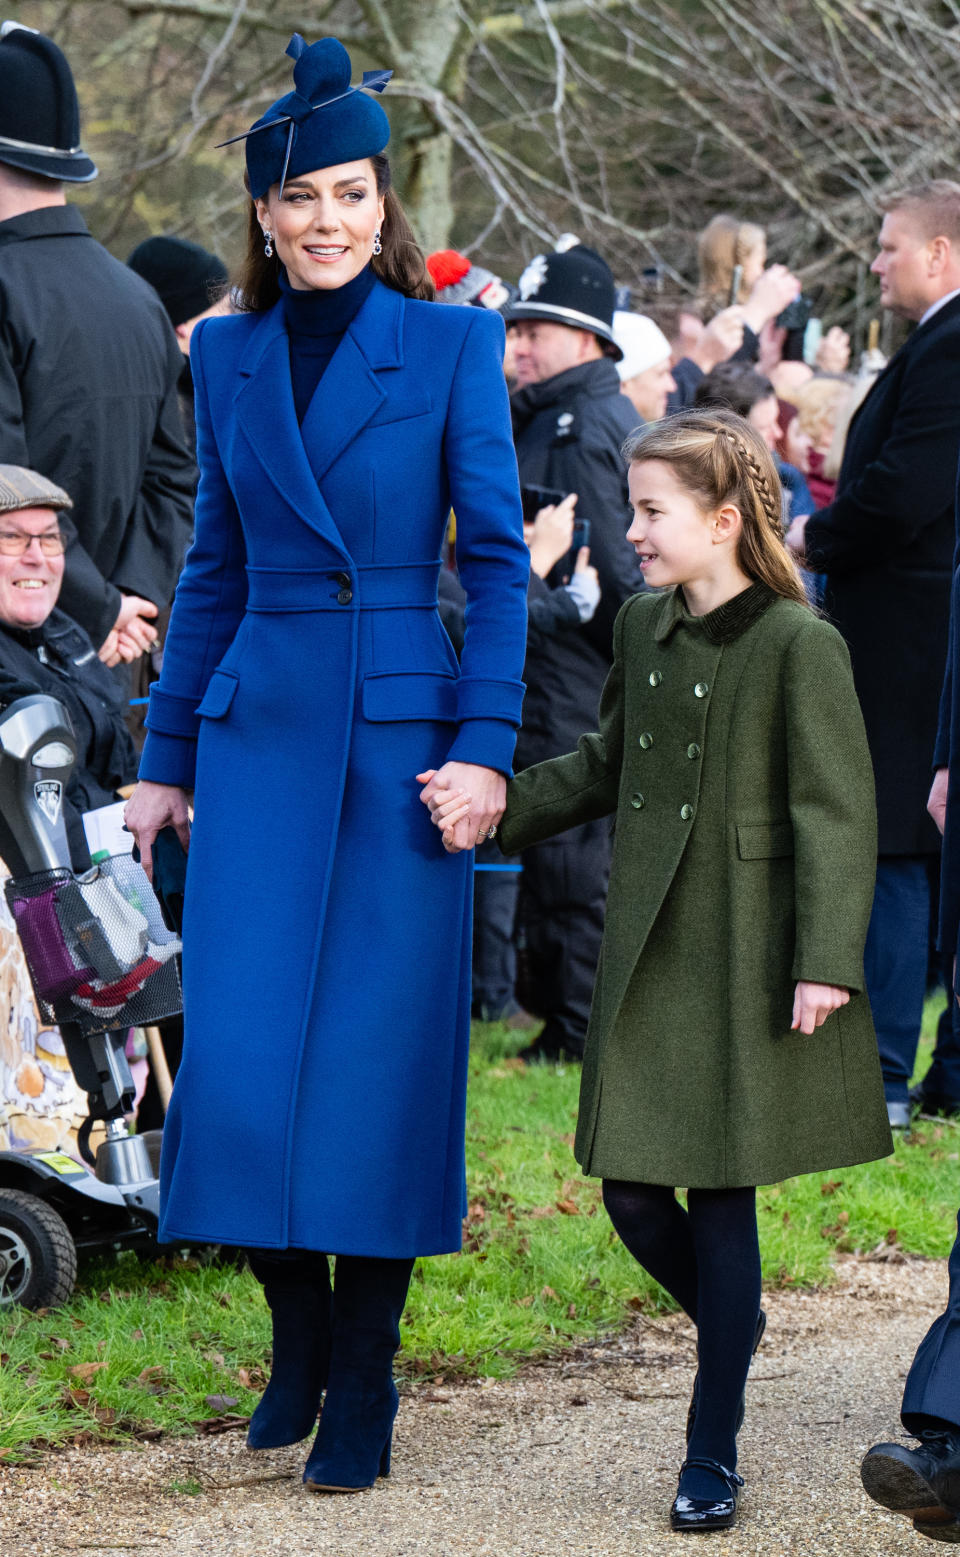 SANDRINGHAM, NORFOLK - DECEMBER 25: Catherine, Princess of Wales and Princess Charlotte of Wales attend the Christmas Morning Service at Sandringham Church on December 25, 2023 in Sandringham, Norfolk. (Photo by Samir Hussein/WireImage)